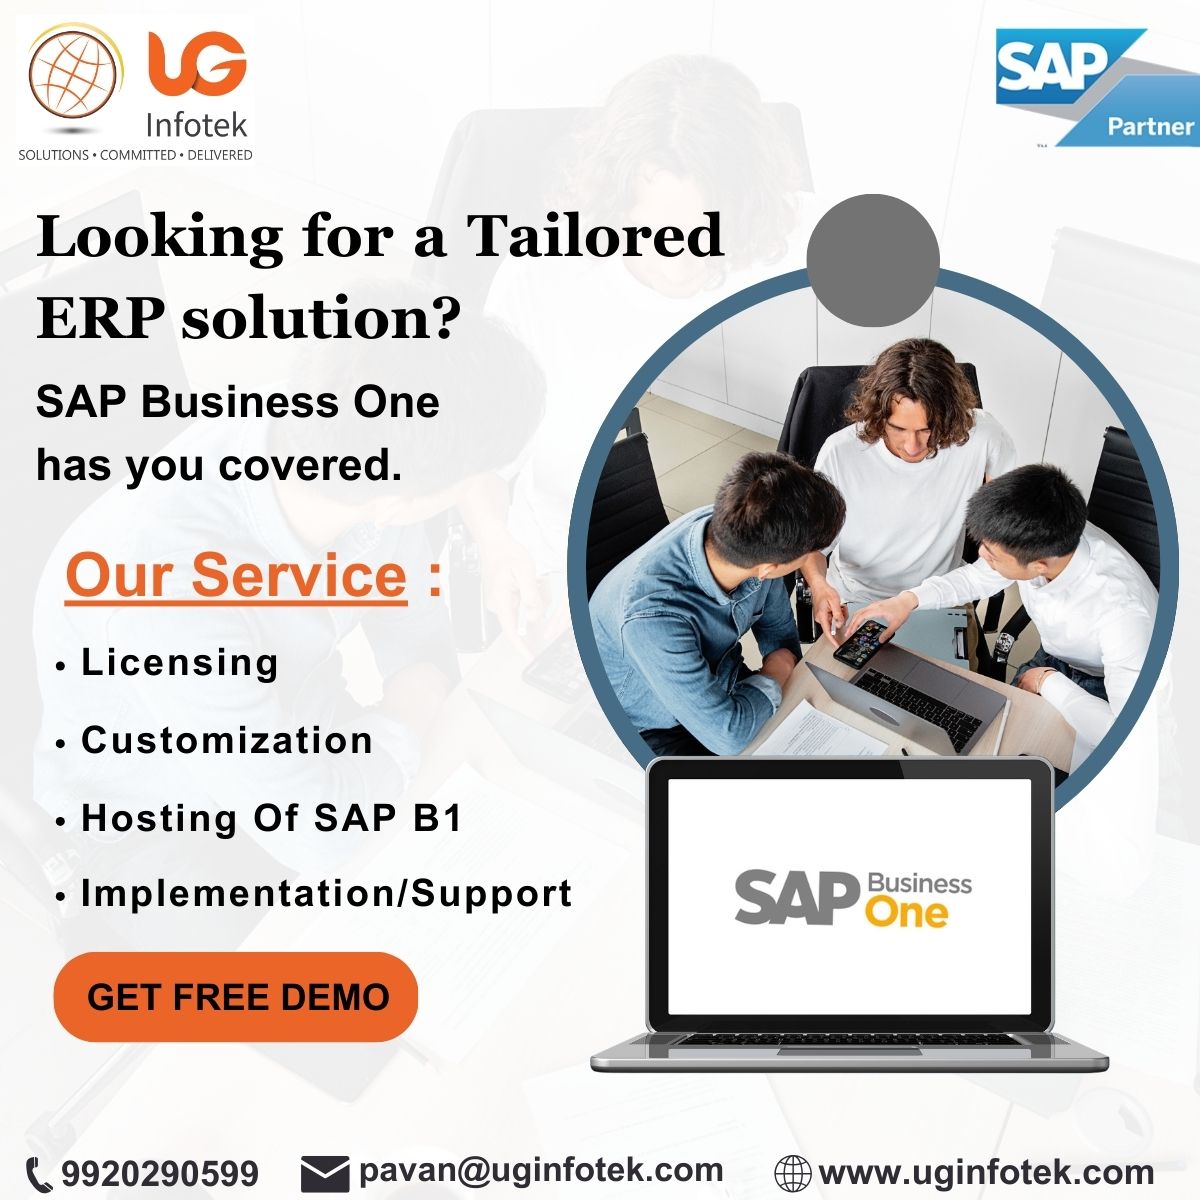 Choose SAP B1 from UG Infotek LLP for expertise, affordability, and reliability. Grow your business with confidence. #sapbusinessone #inventorymanagement #affordableprice #uginfotekllp #sapb1 #erpsolutions #b2b #supportsmallbusiness #thanecity #maharashtra #pune #SMEs